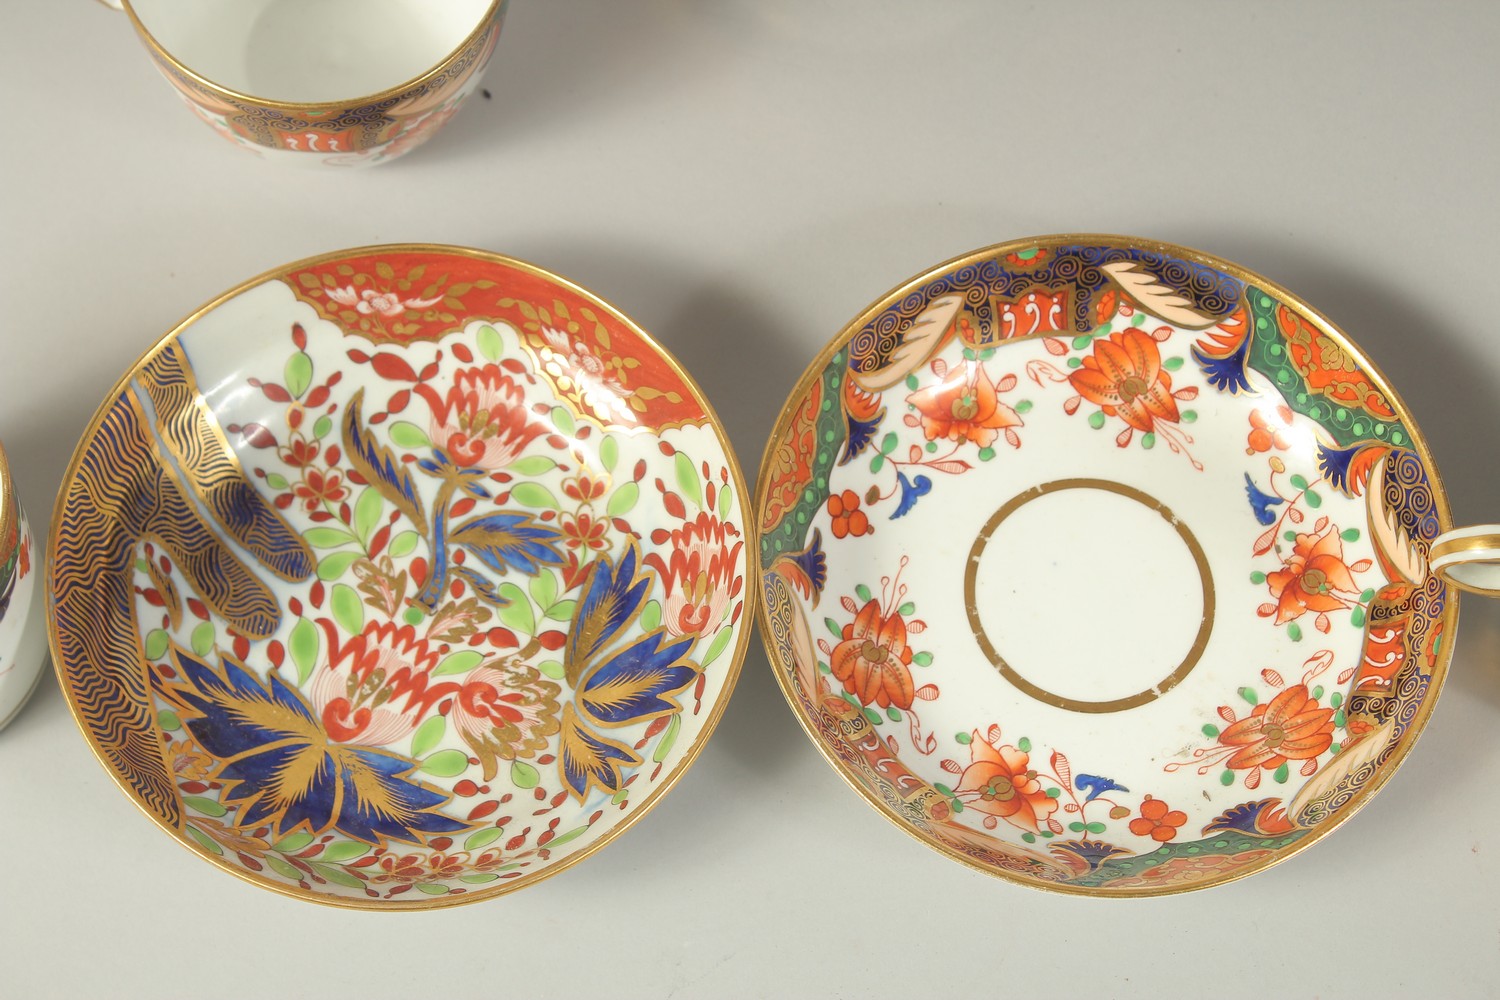 A SPODE IMARI PATTERN COFFEE CAN, TEACUP AND SAUCER, painted with pattern 1645, and a Chamberlain' - Image 4 of 4